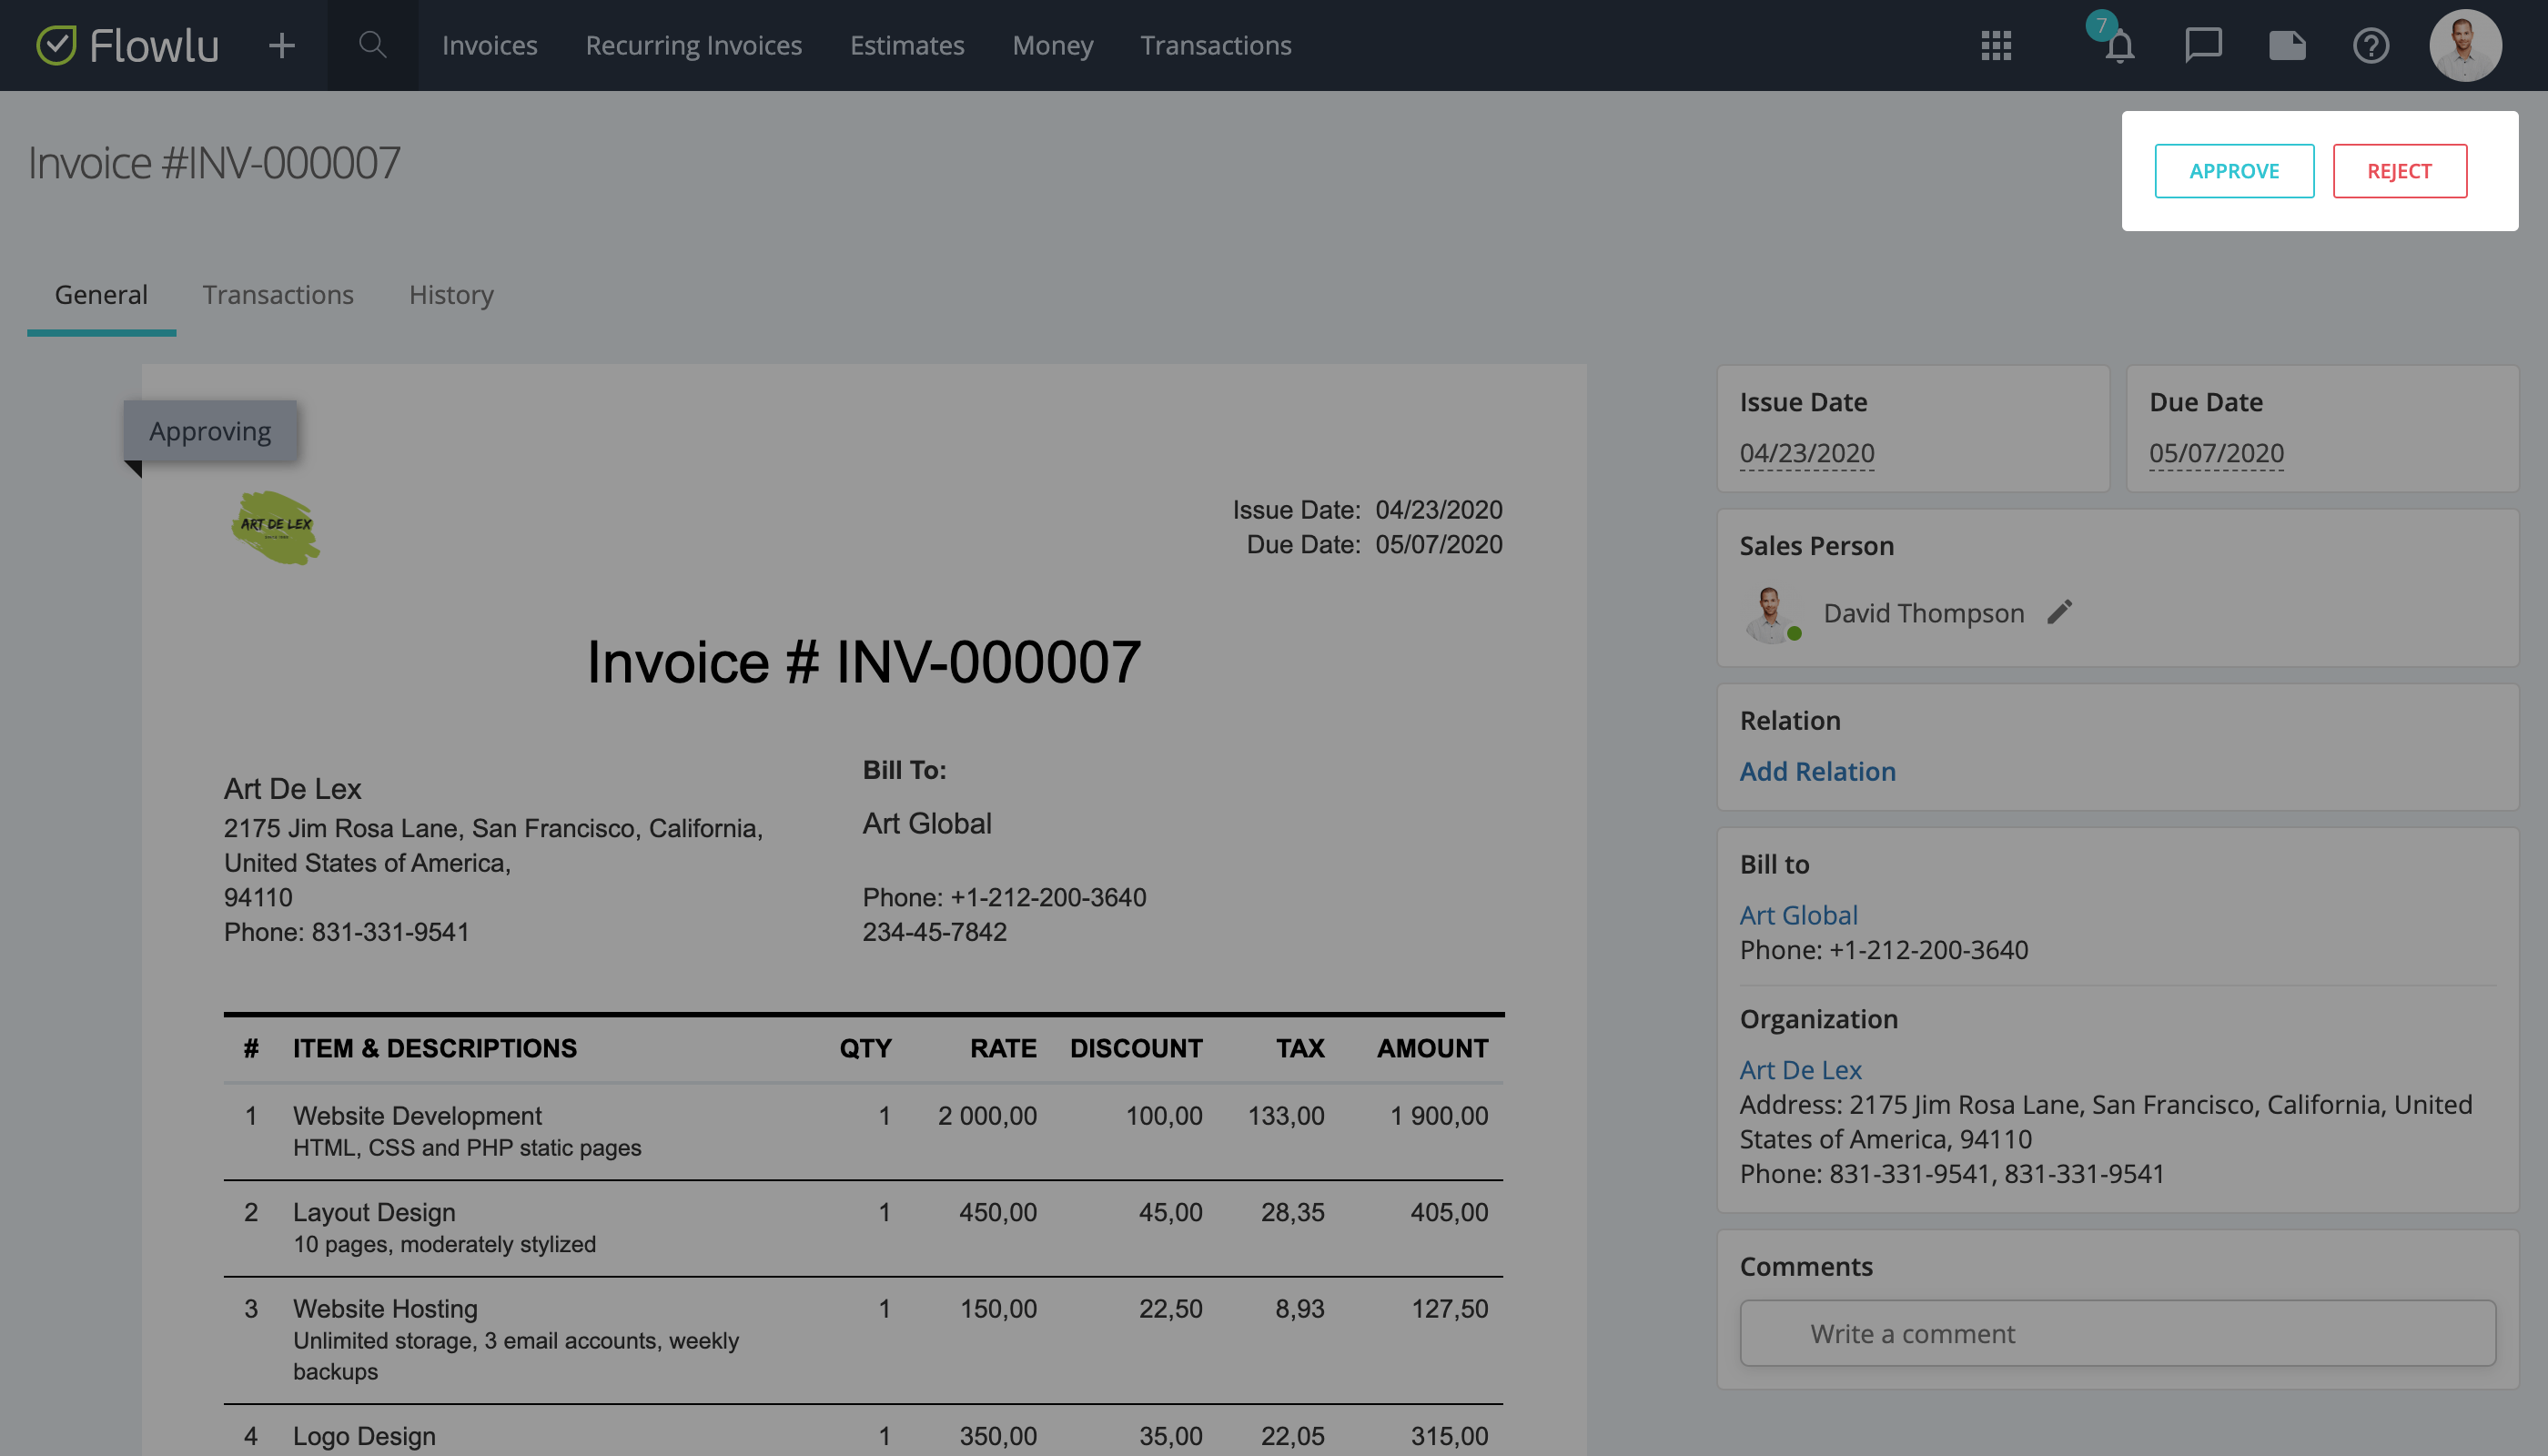 Invoice Approval